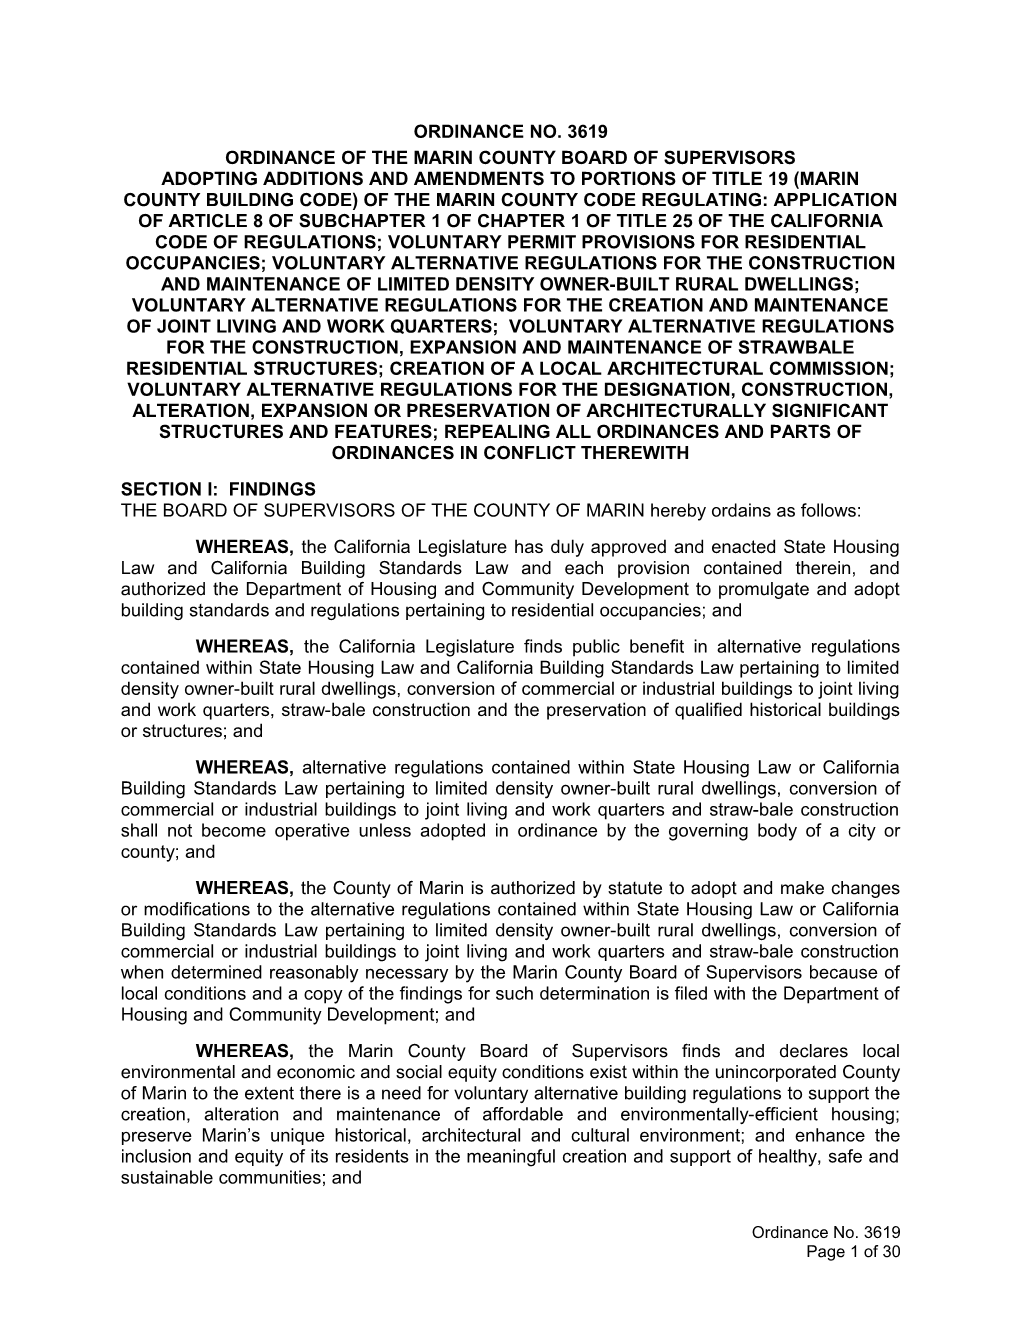 Ordinance of the Marin County Board of Supervisors